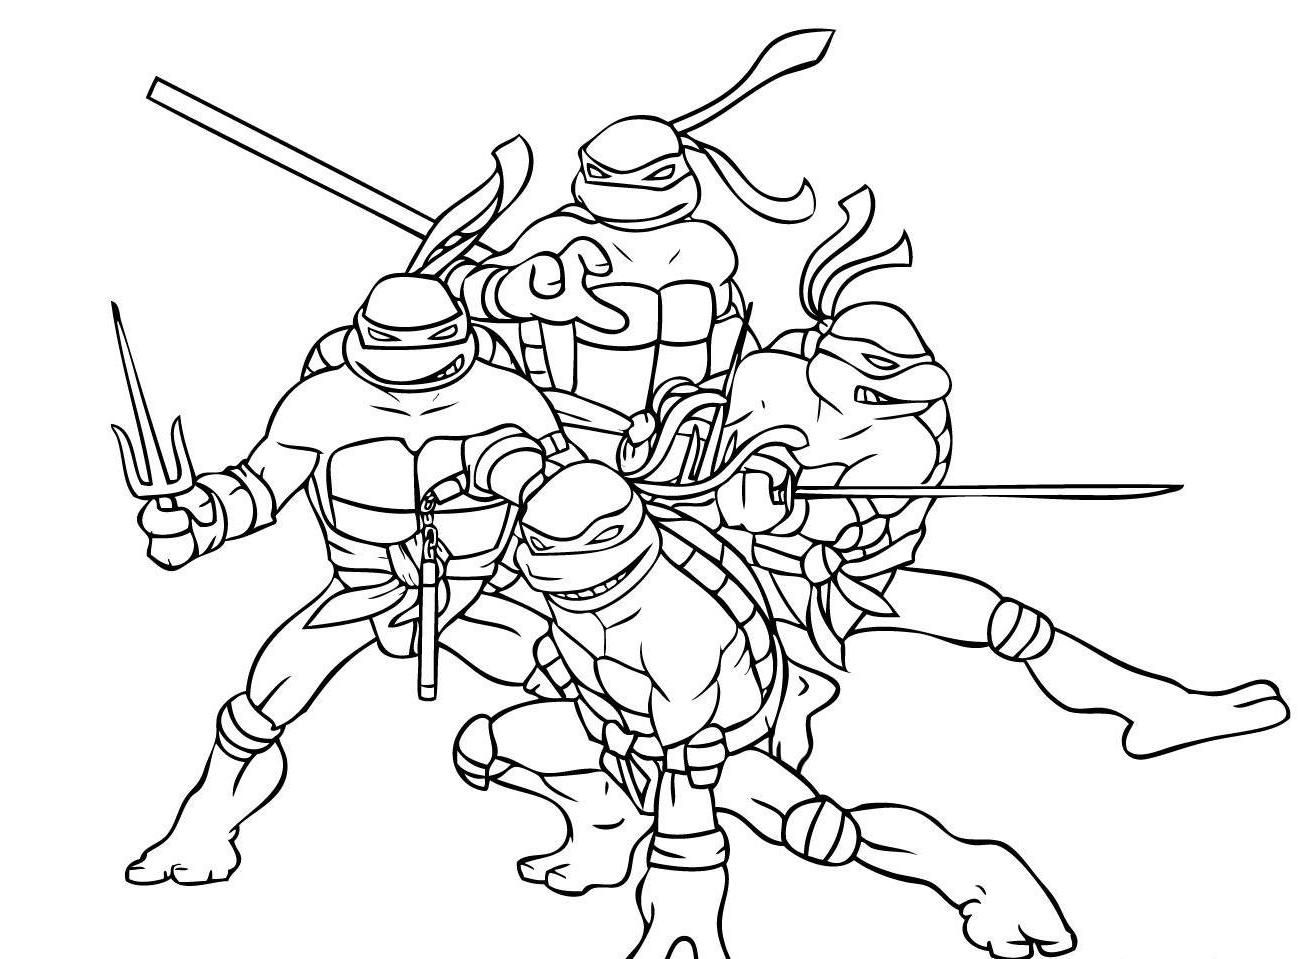 Pictures Of Ninja Turtles To Color - Coloring Pages for Kids and ...